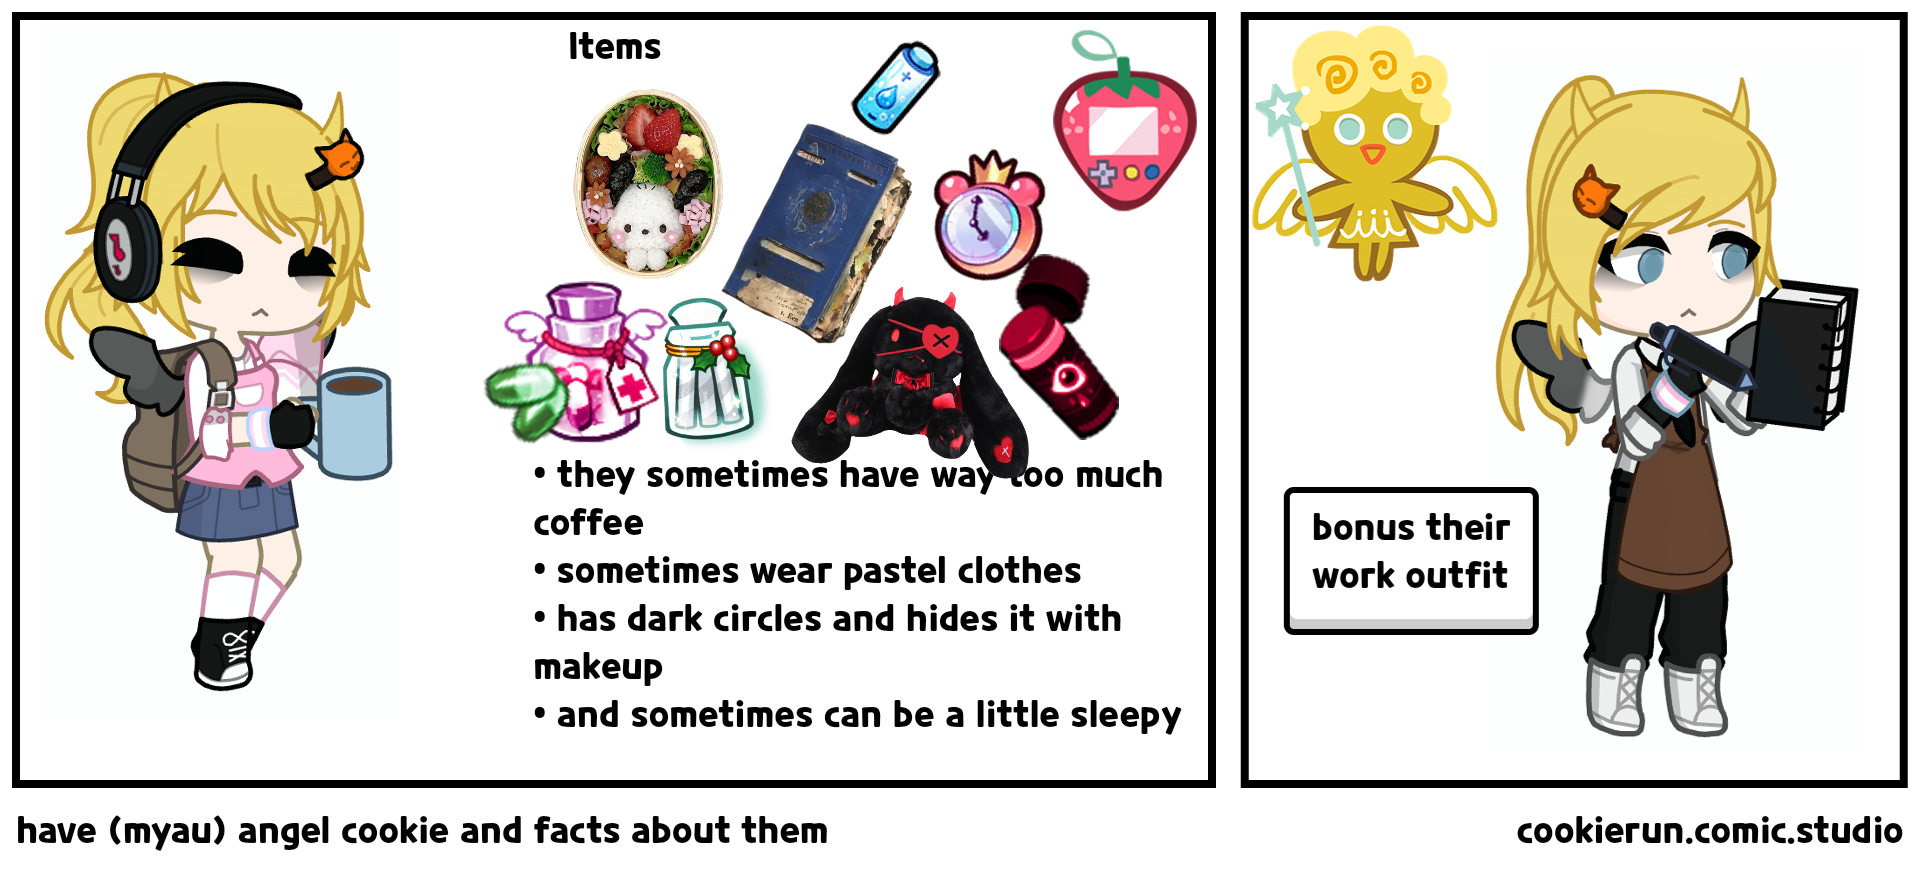 have (myau) angel cookie and facts about them